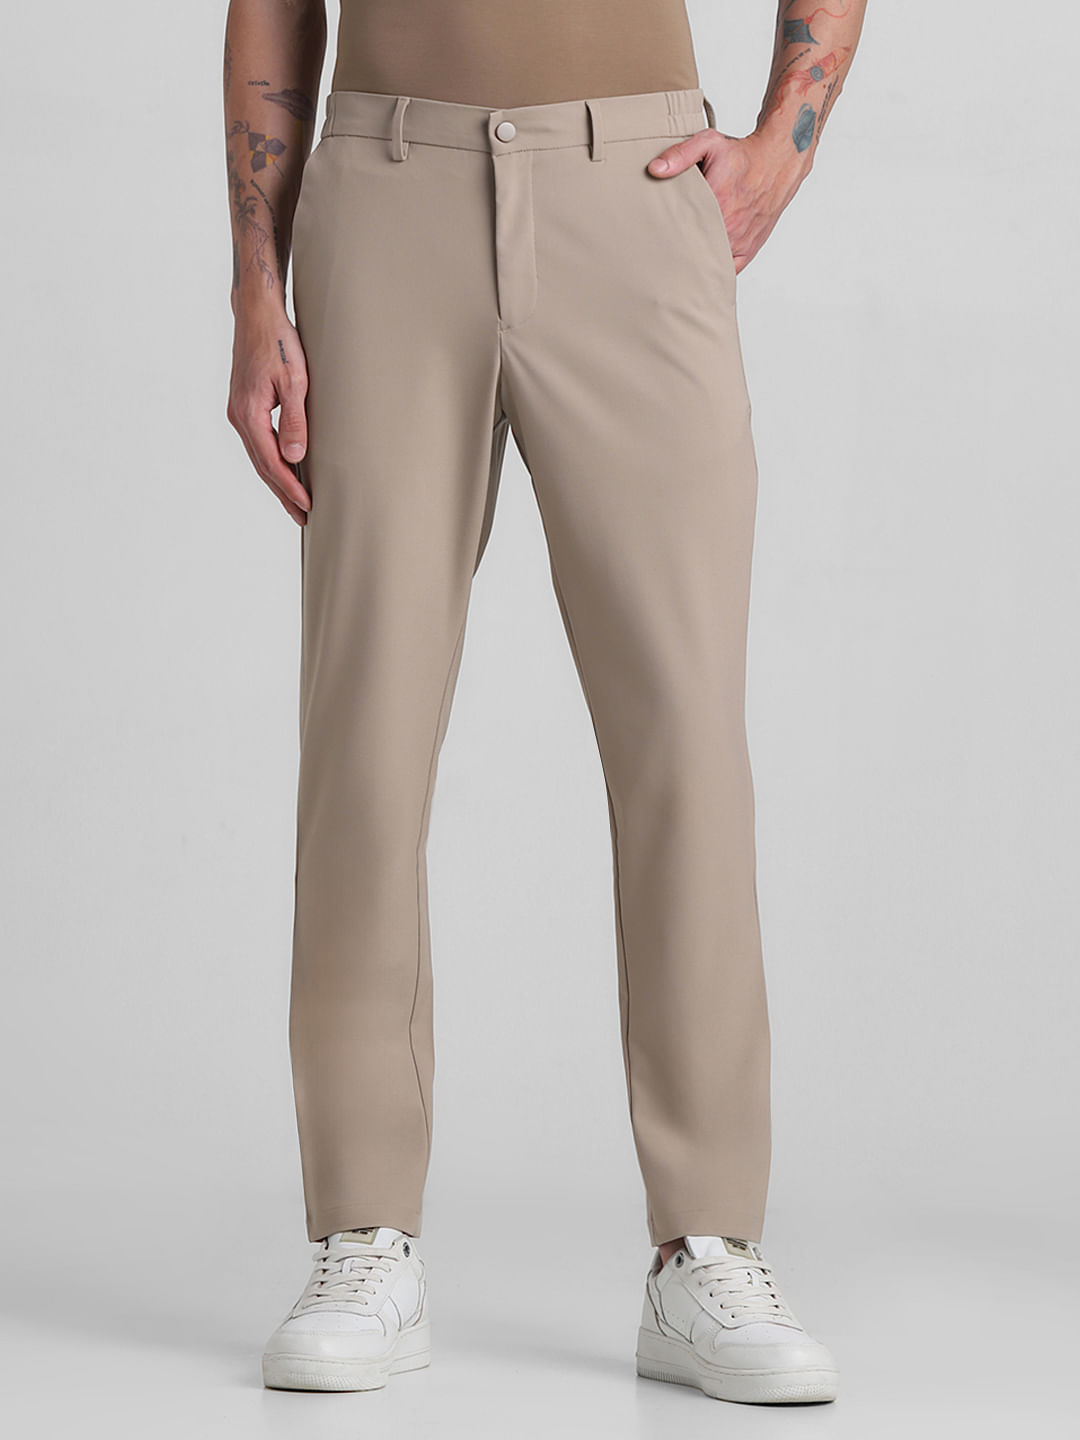 Buy Women Regular Fit Polyester White Trousers Online In India At  Discounted Prices